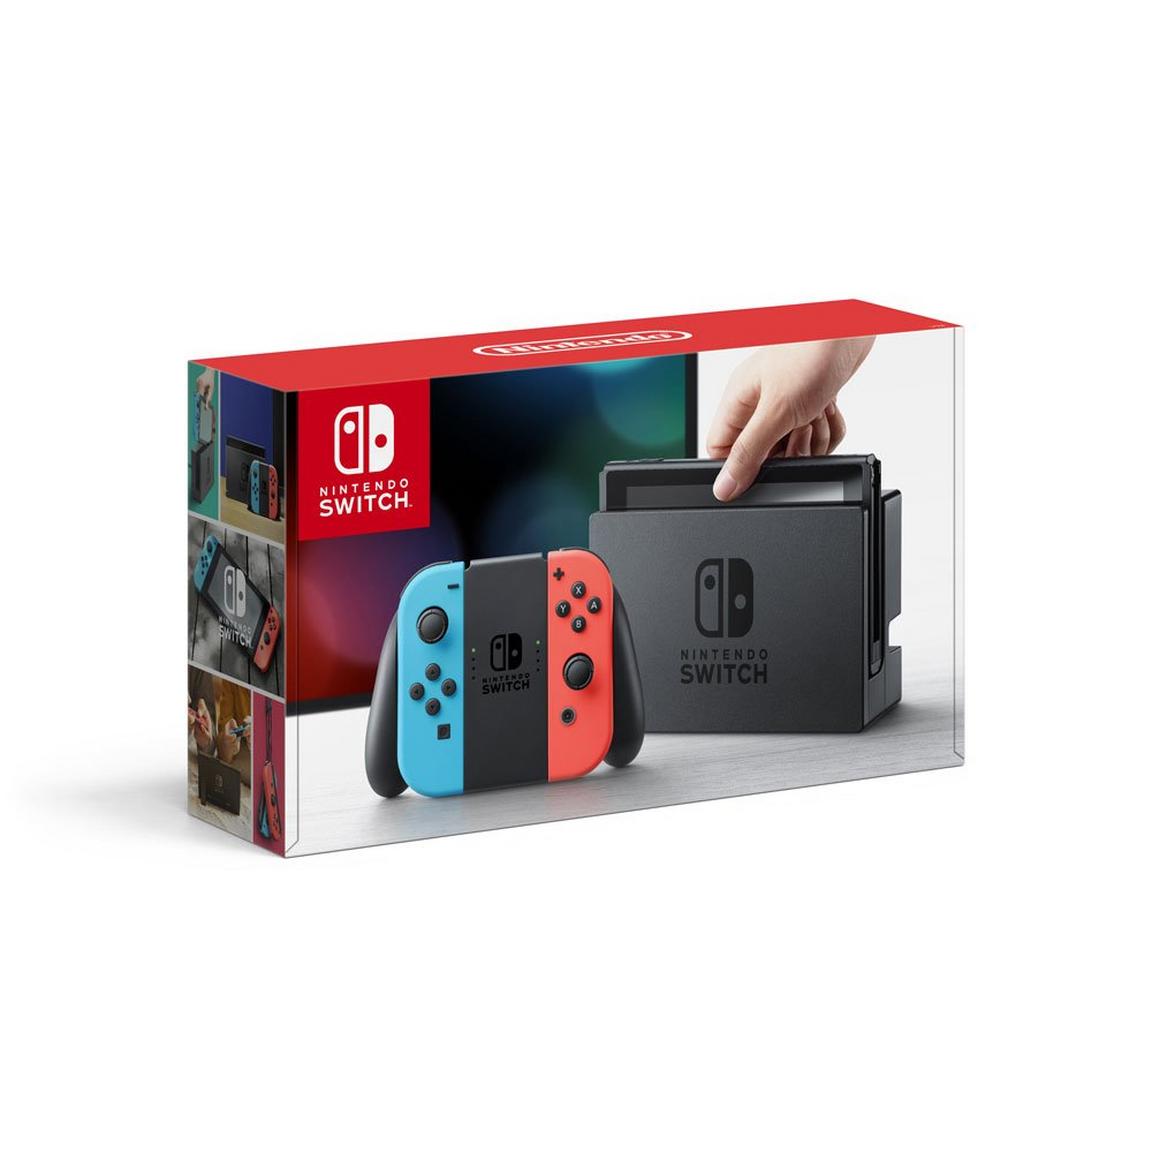 gamestop.com | Nintendo Switch Console with Neon Blue and Neon Red Joy-Con